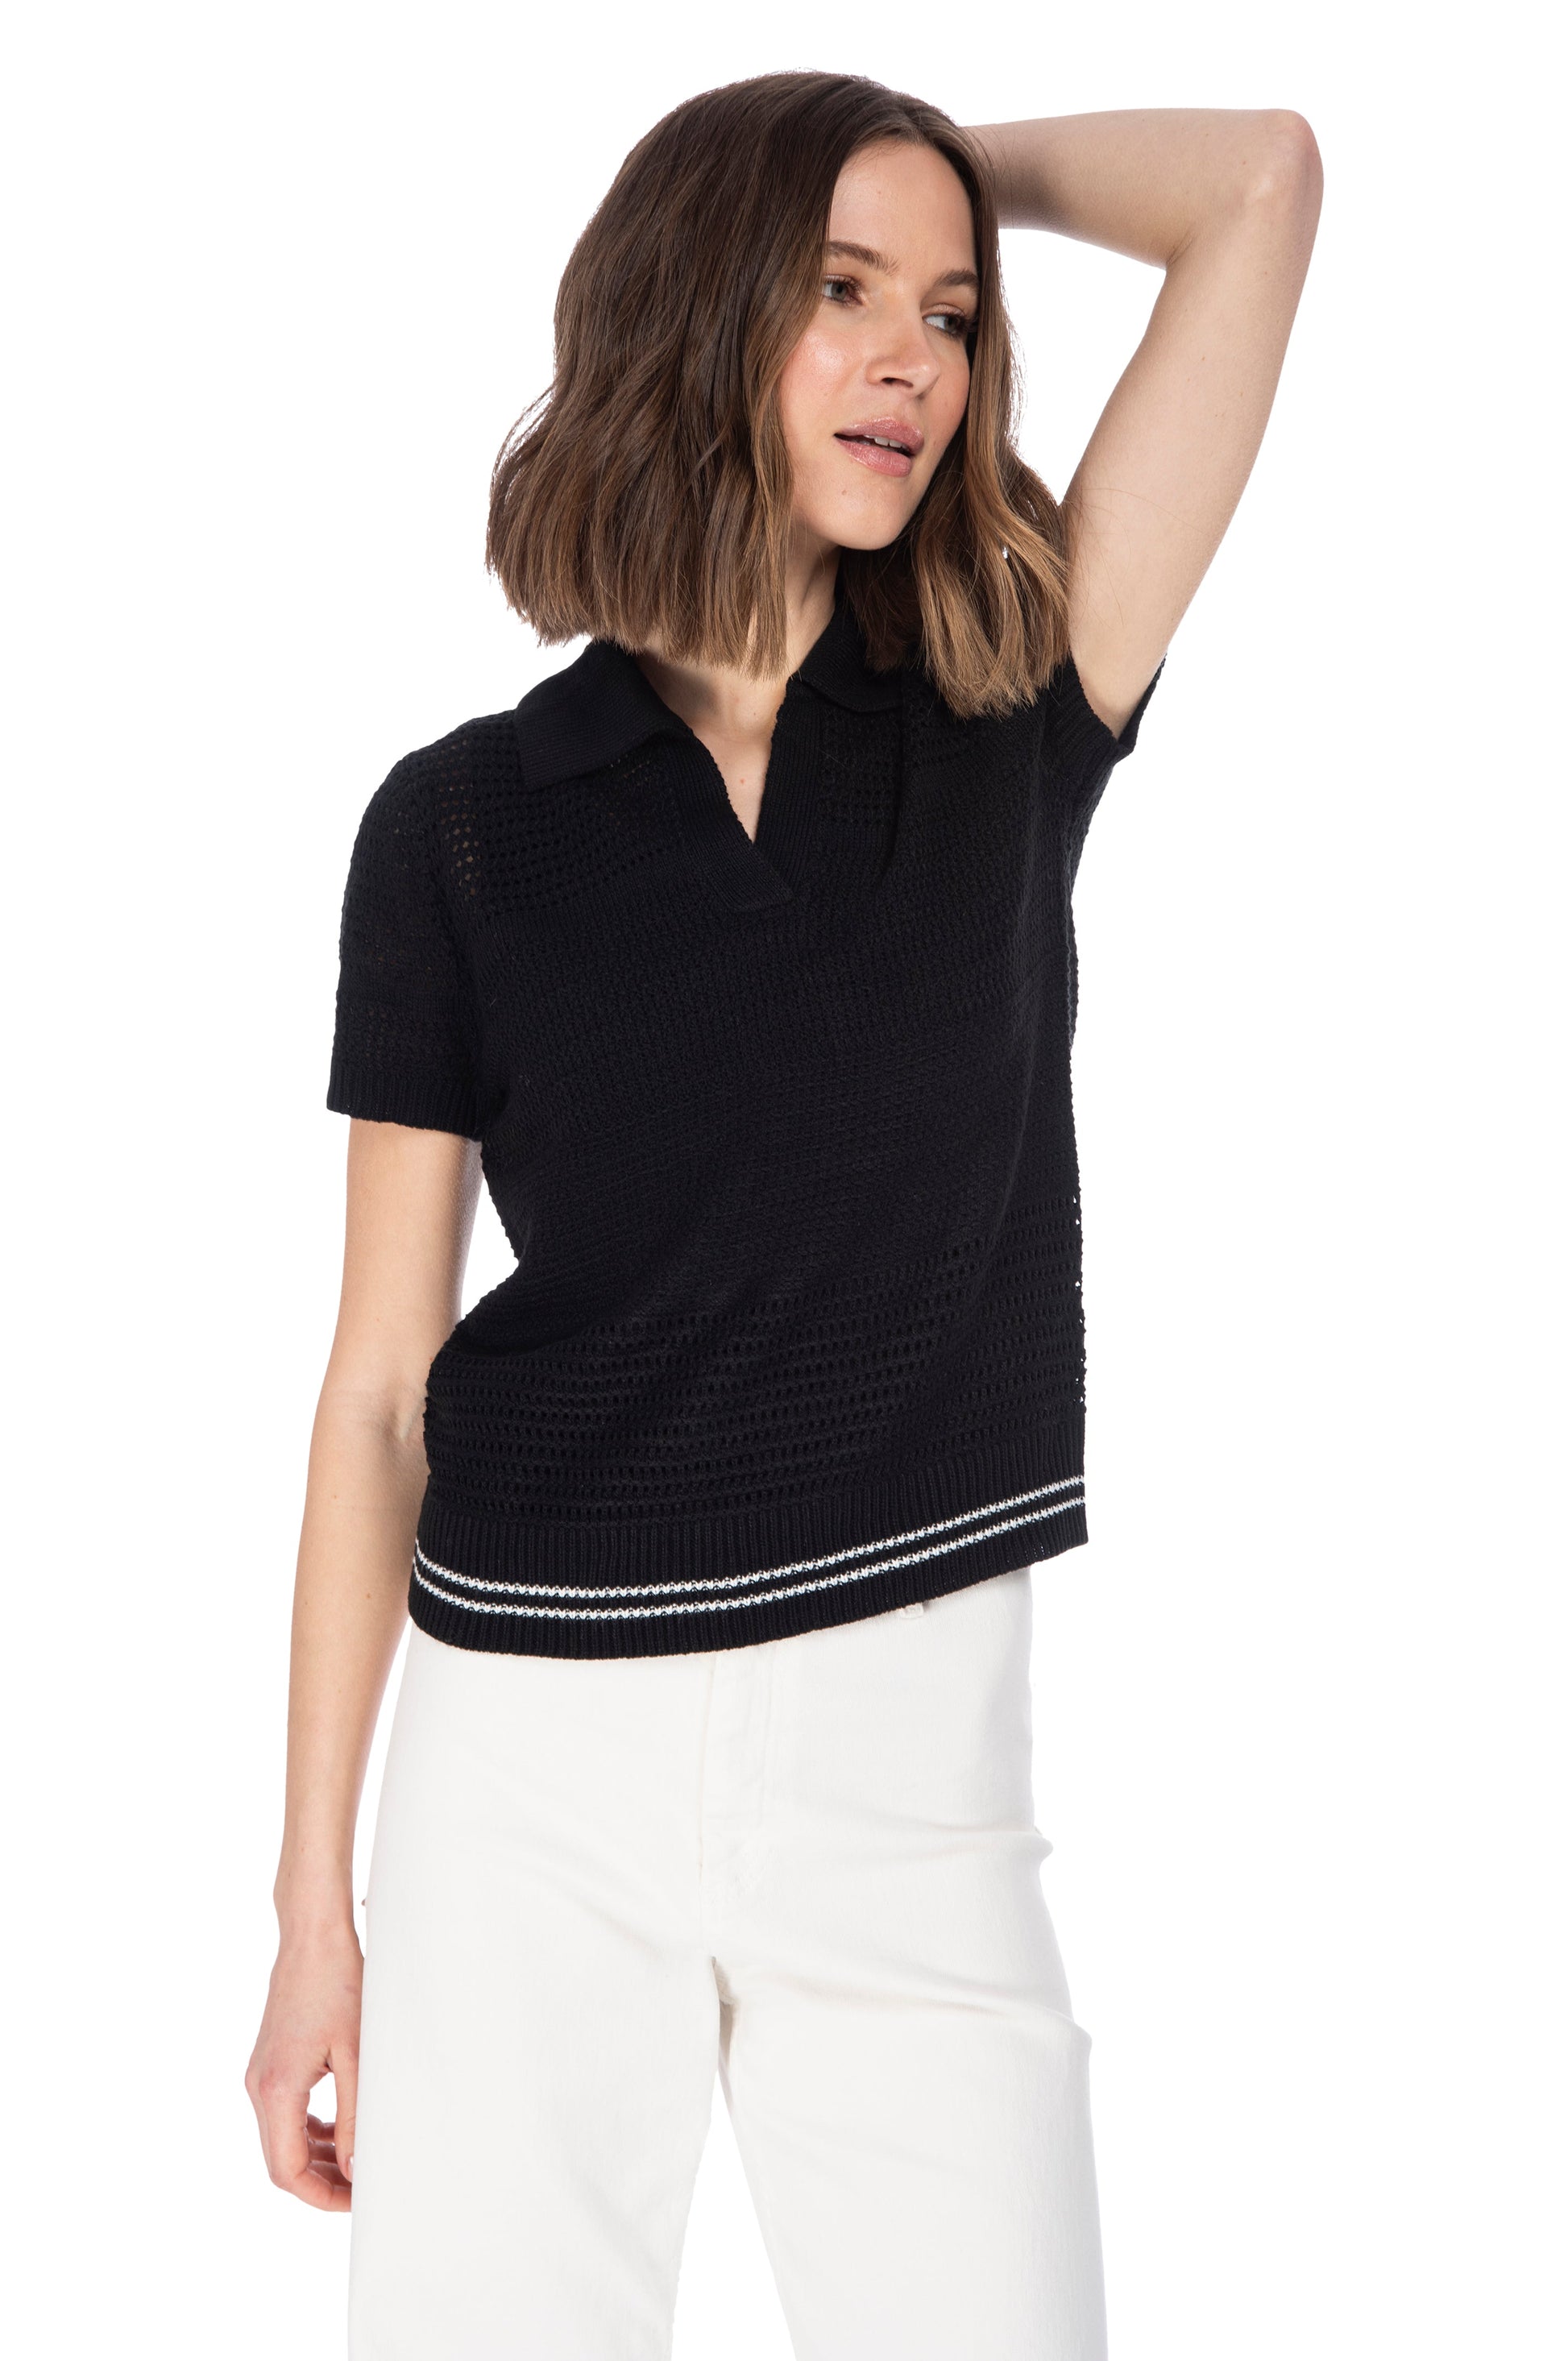 A woman in a stylish black short-sleeved top with racer stripe detail (B Collection by Bobeau) and white pants posing with one hand behind her head.